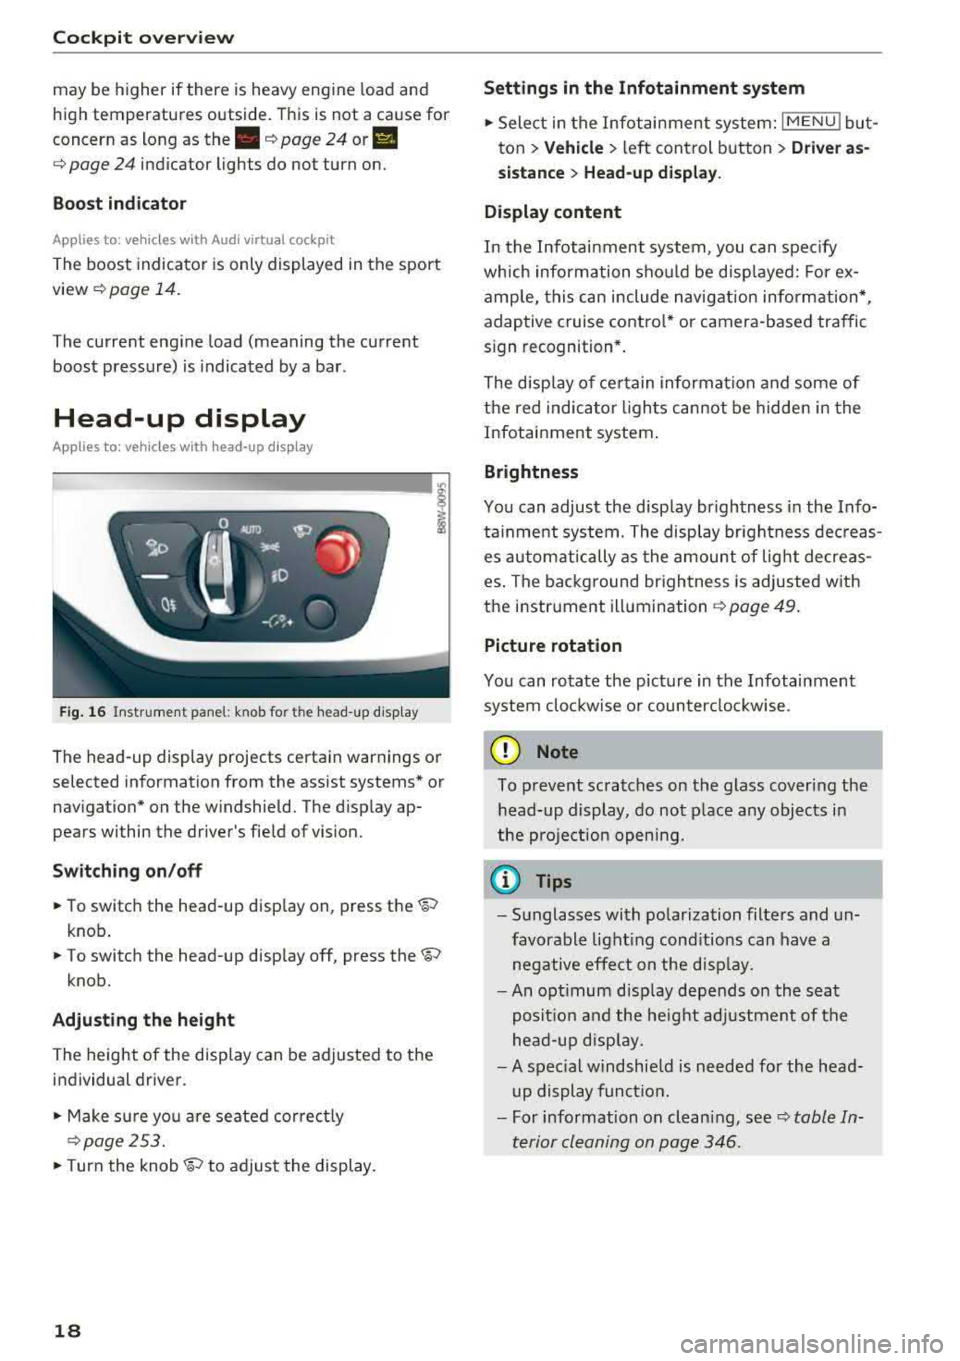 AUDI Q5 2018  Owners Manual Cockpit overv iew 
may  be  higher  if there  is heavy  eng ine  load  and 
high  temperatures  outside . This is  not  a  cause  for 
concern  as  long  as 
the .¢ page  24 or II 
¢ page  24 indica